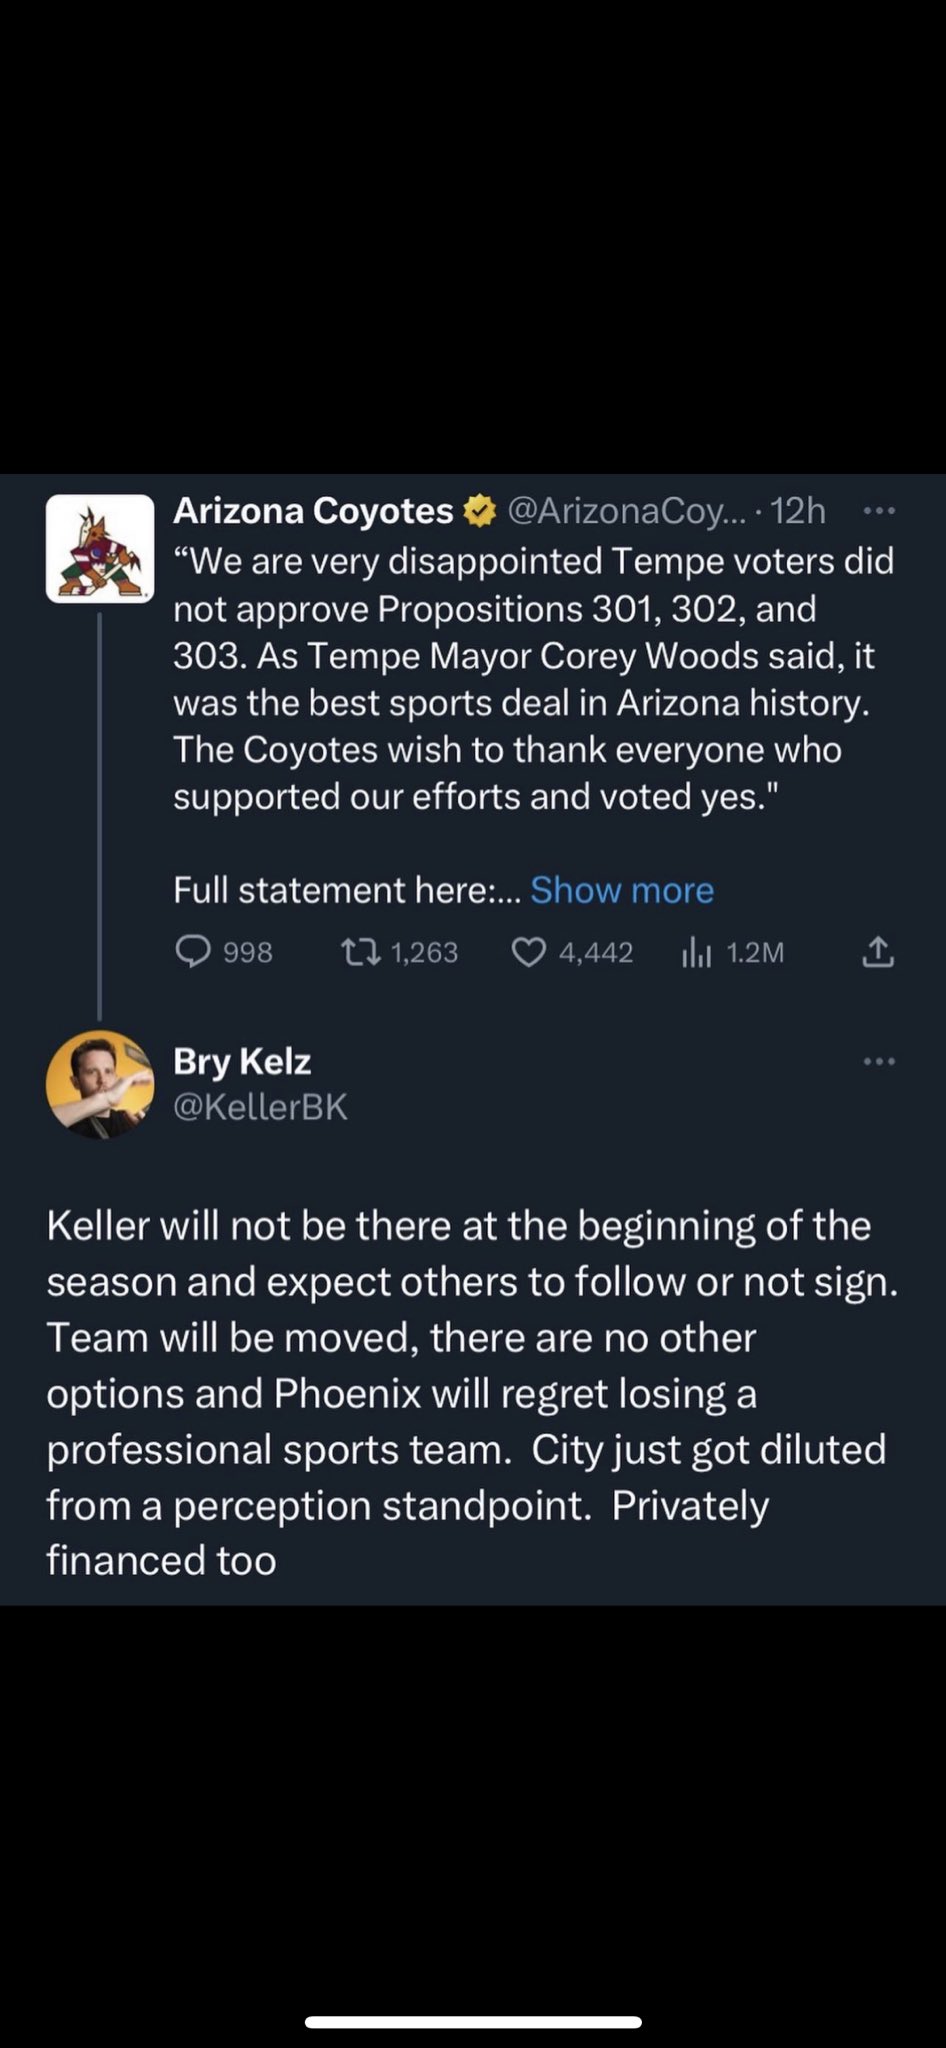 Coyotes Say Rumor of Team Being Sold, Moving to Houston Is